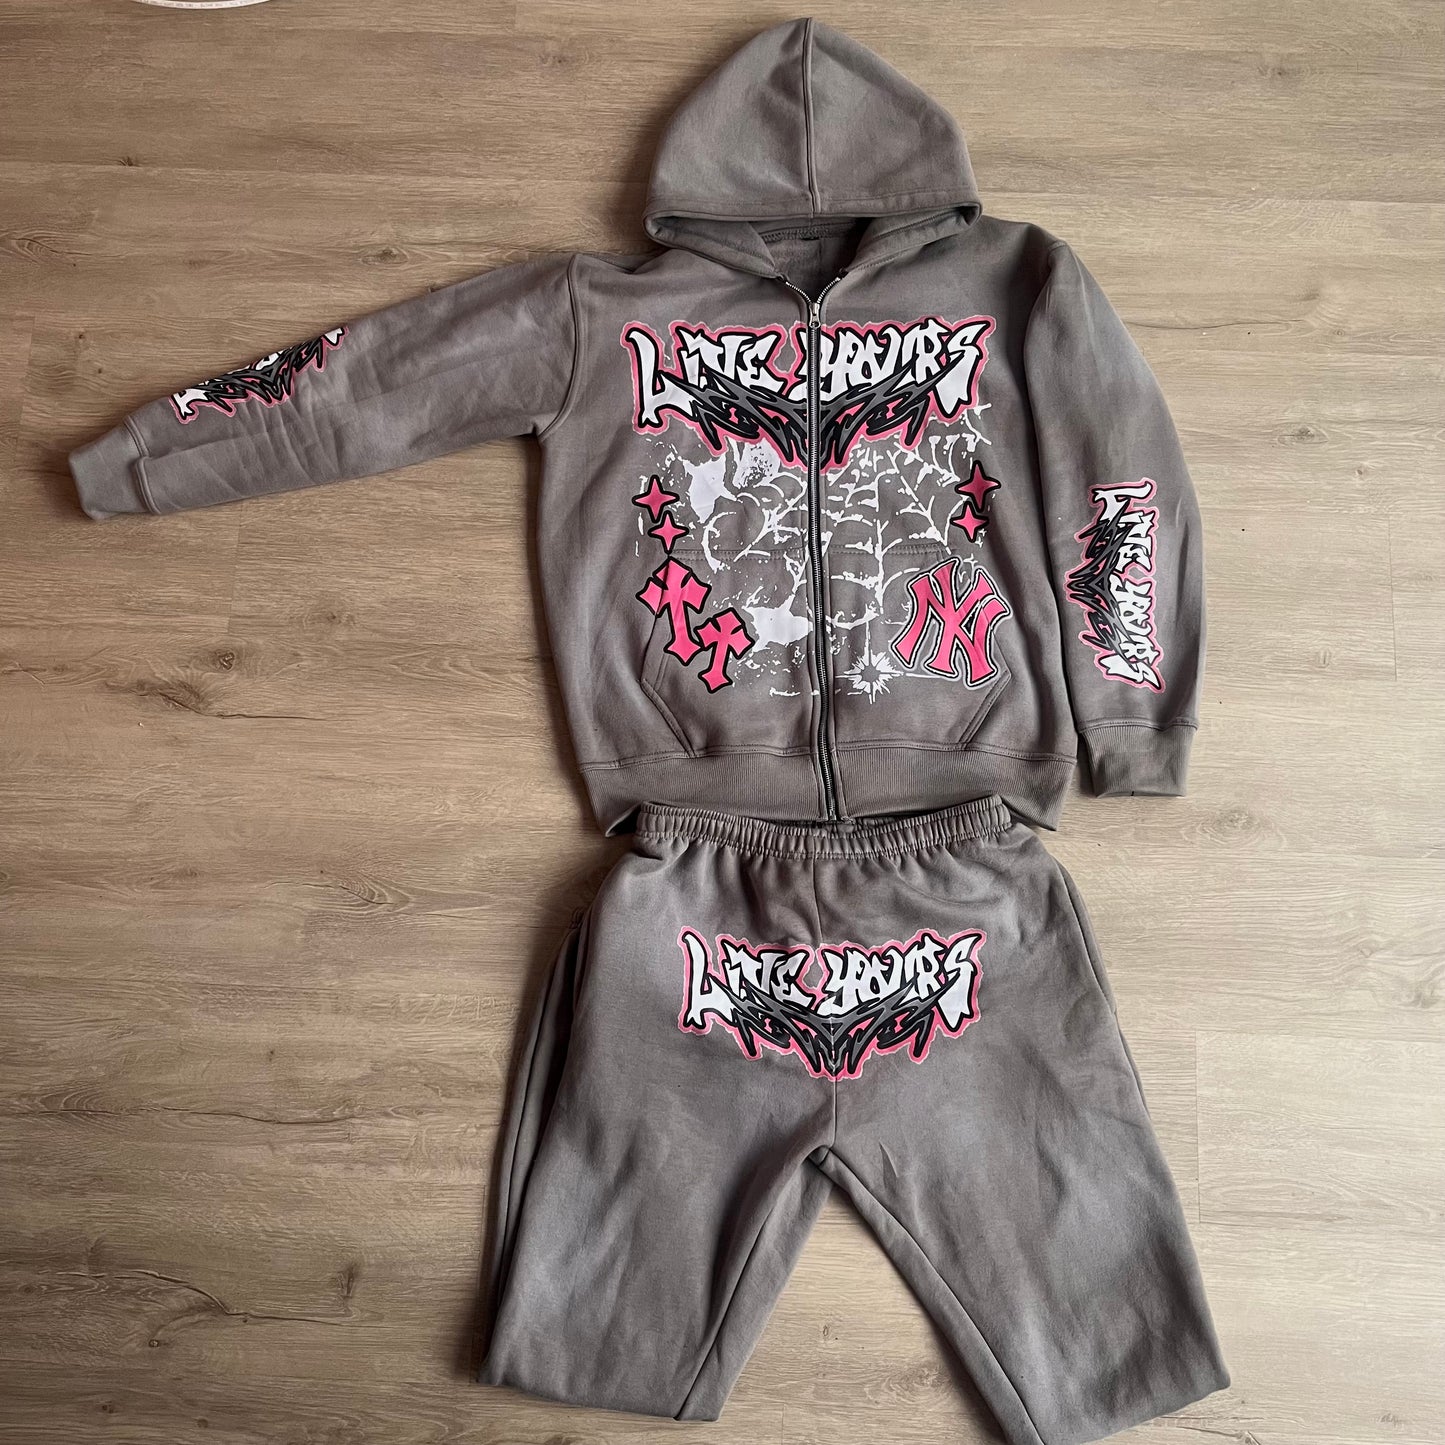 Liveyours Grey/pink wash dye zip up